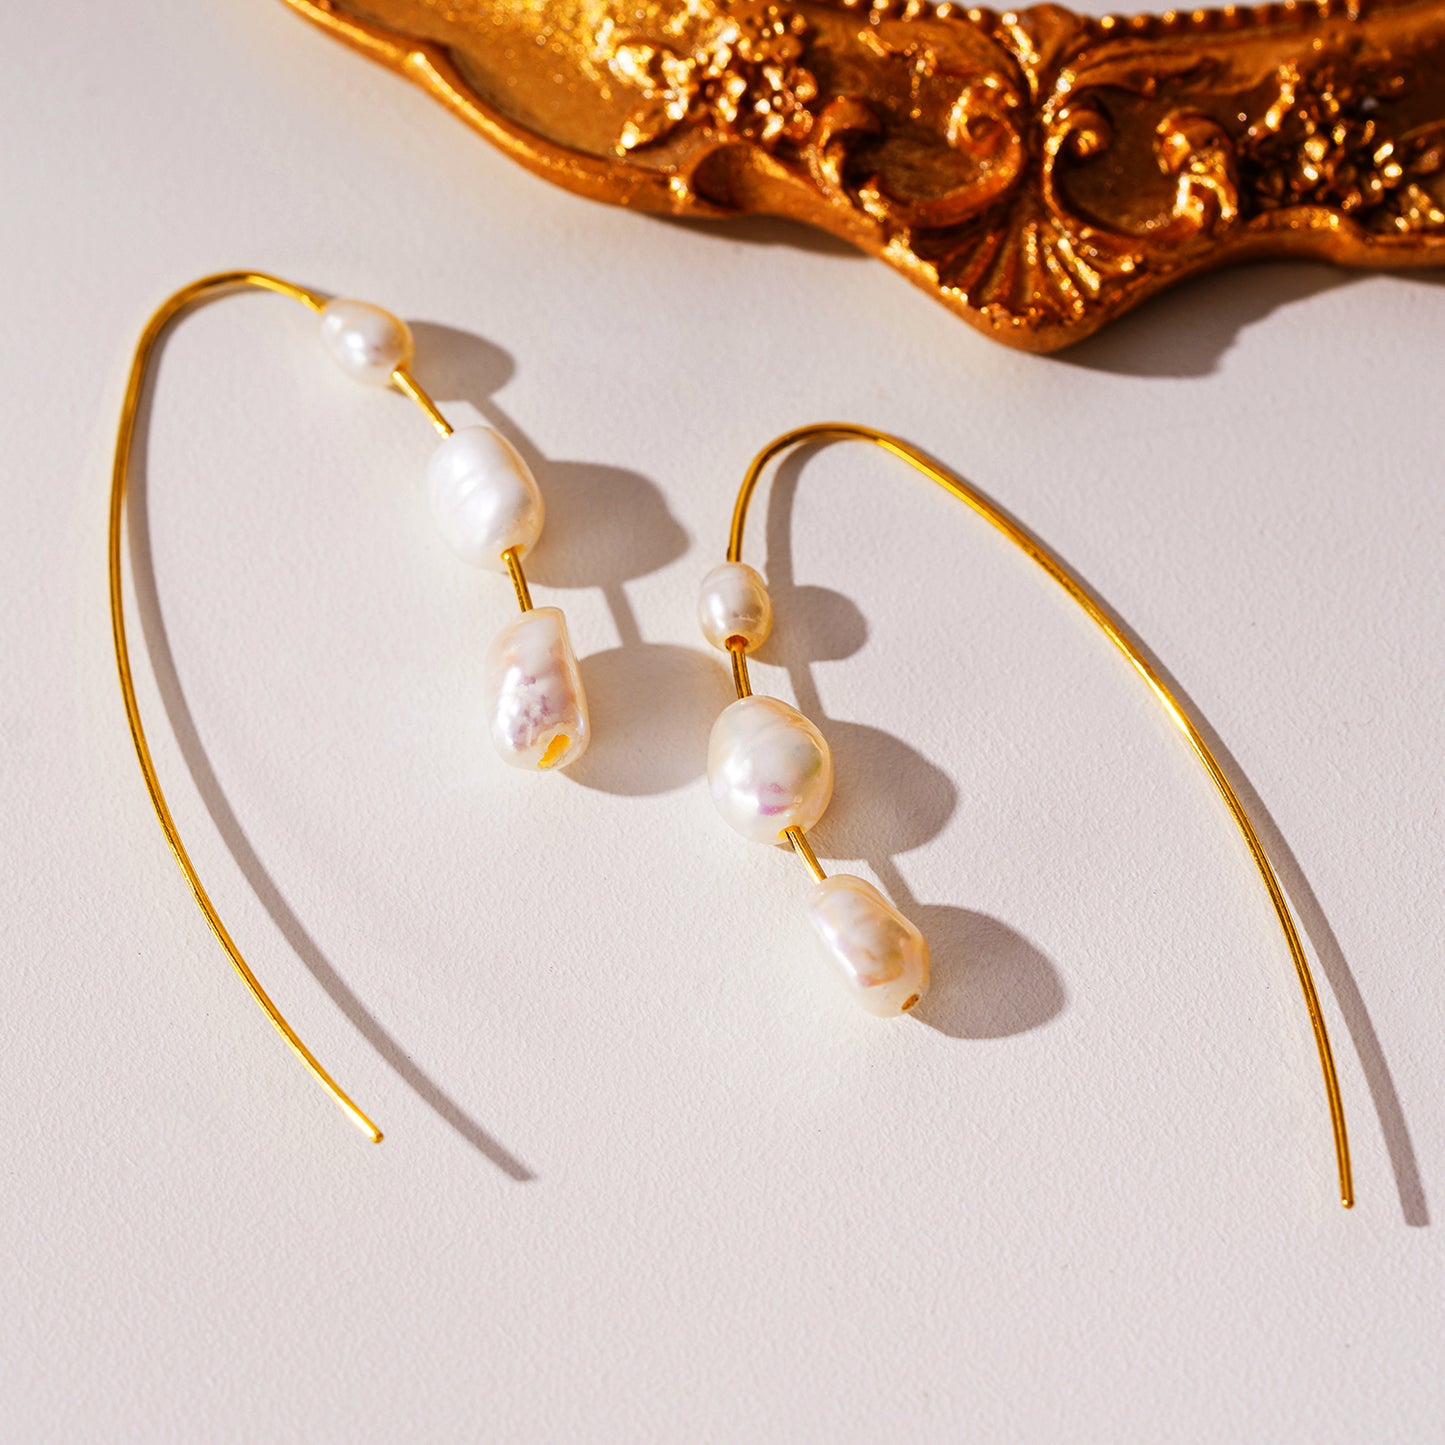 Style LISANNE 0985: Geometric Shaped Modernist Hoop Earring with a Trio of Fresh-Water Pearls.